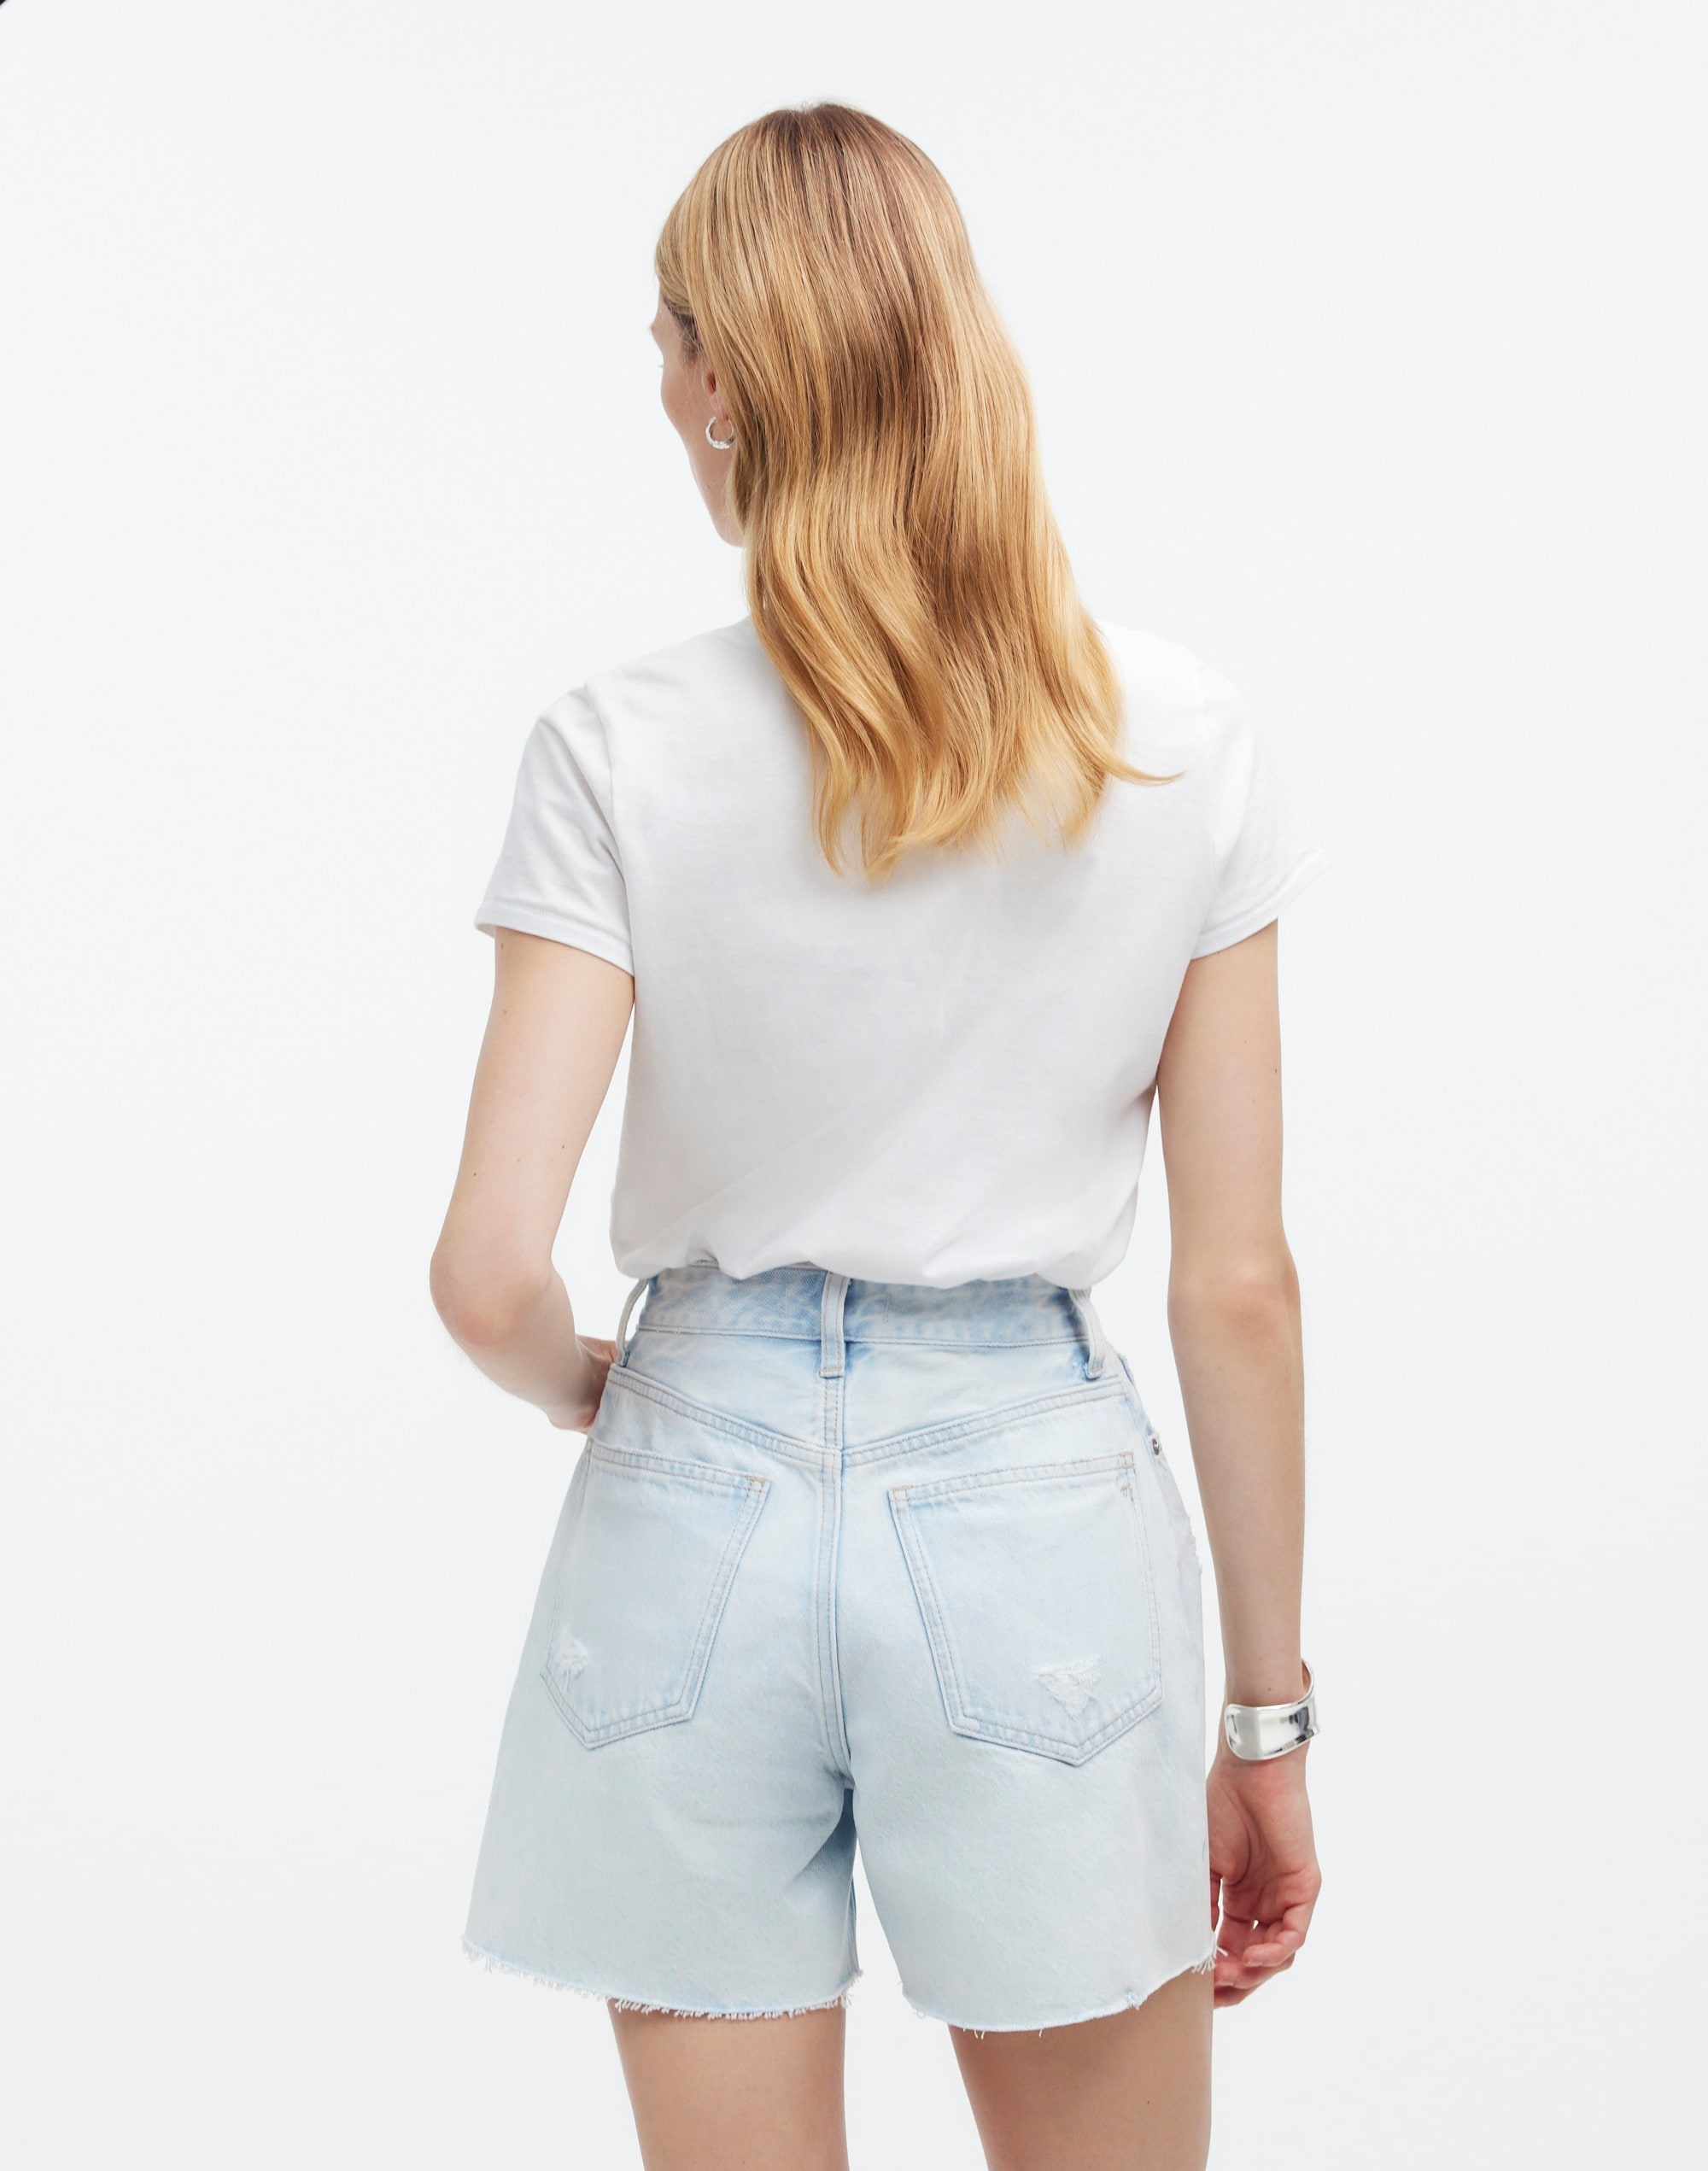 The '90s Mid-Length Jean Short Pearlman Wash